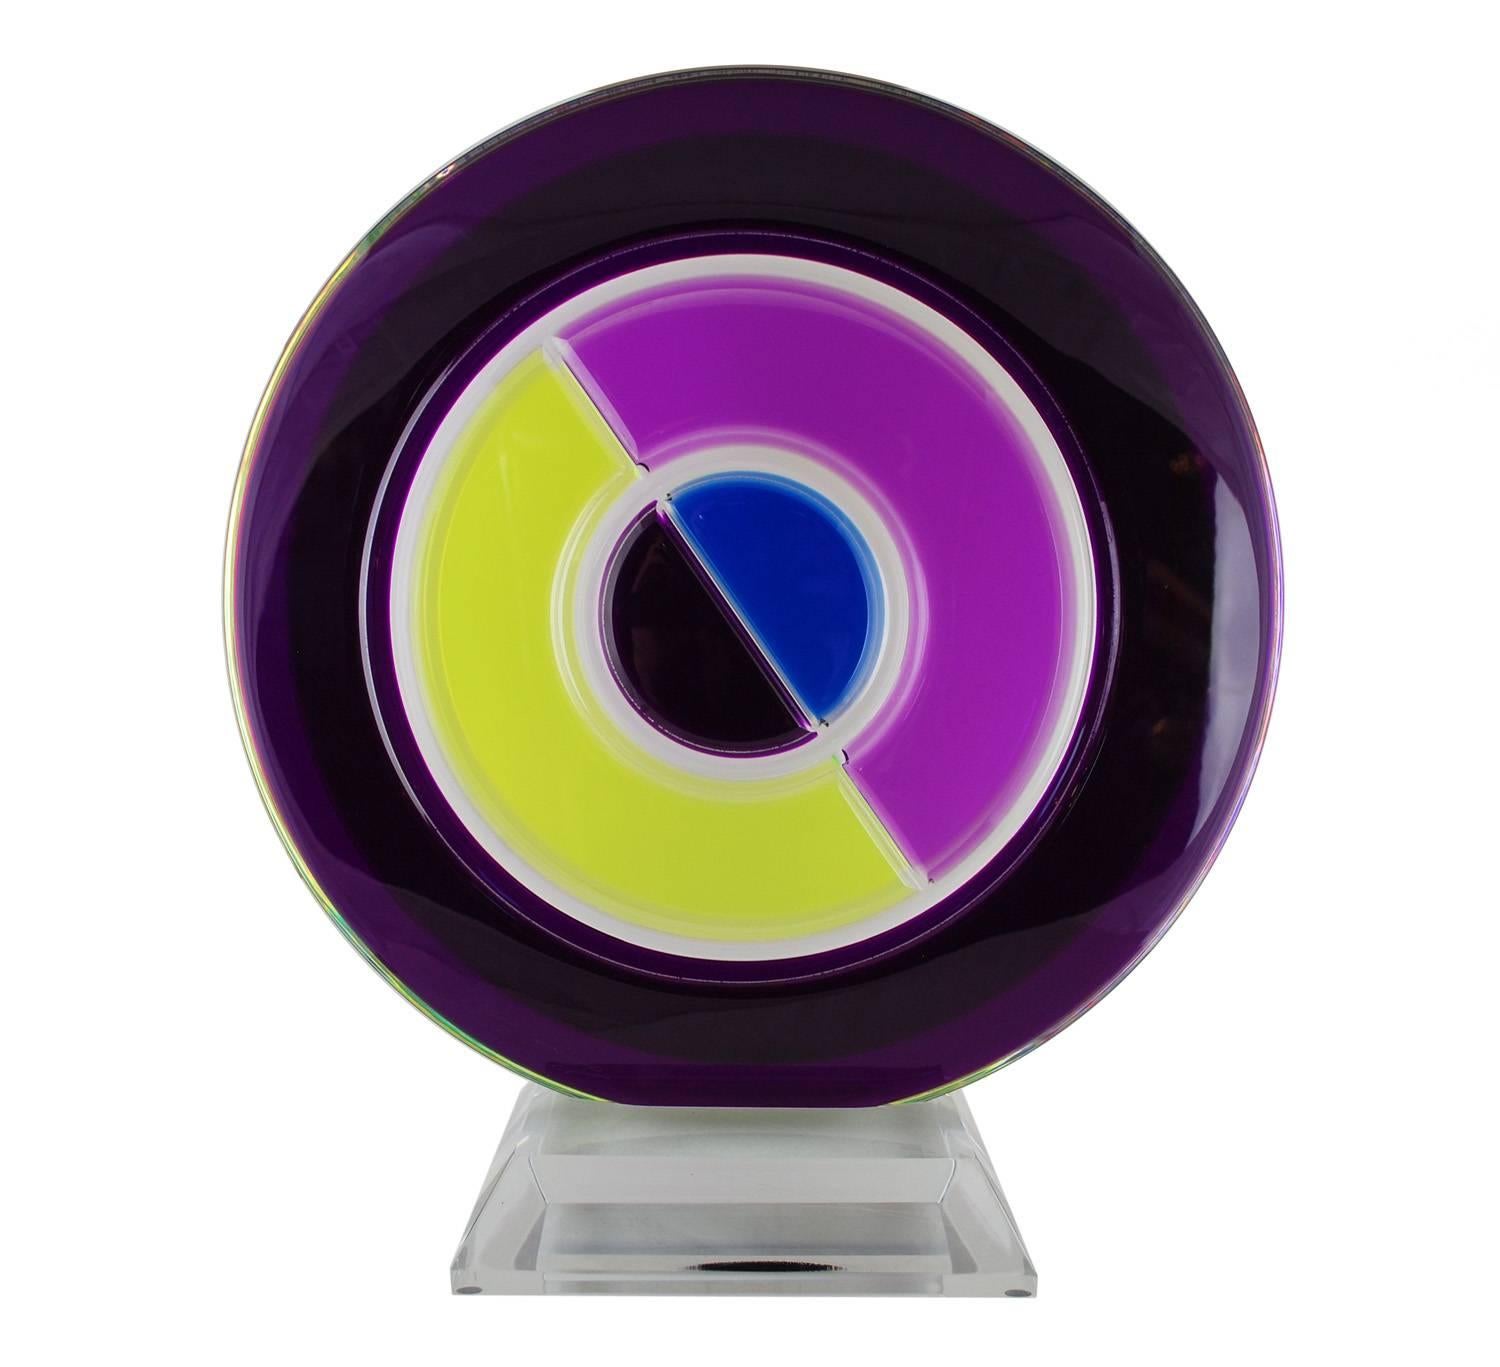 An impactful Lucite art piece by Israeli artist Shlomi Haziza. Crisp, geometric design featuring intense purples, chartreuse and blue on a clear base. 

Great condition, light scratch on the purple top, some on the bottom of the base.

Sophisticated